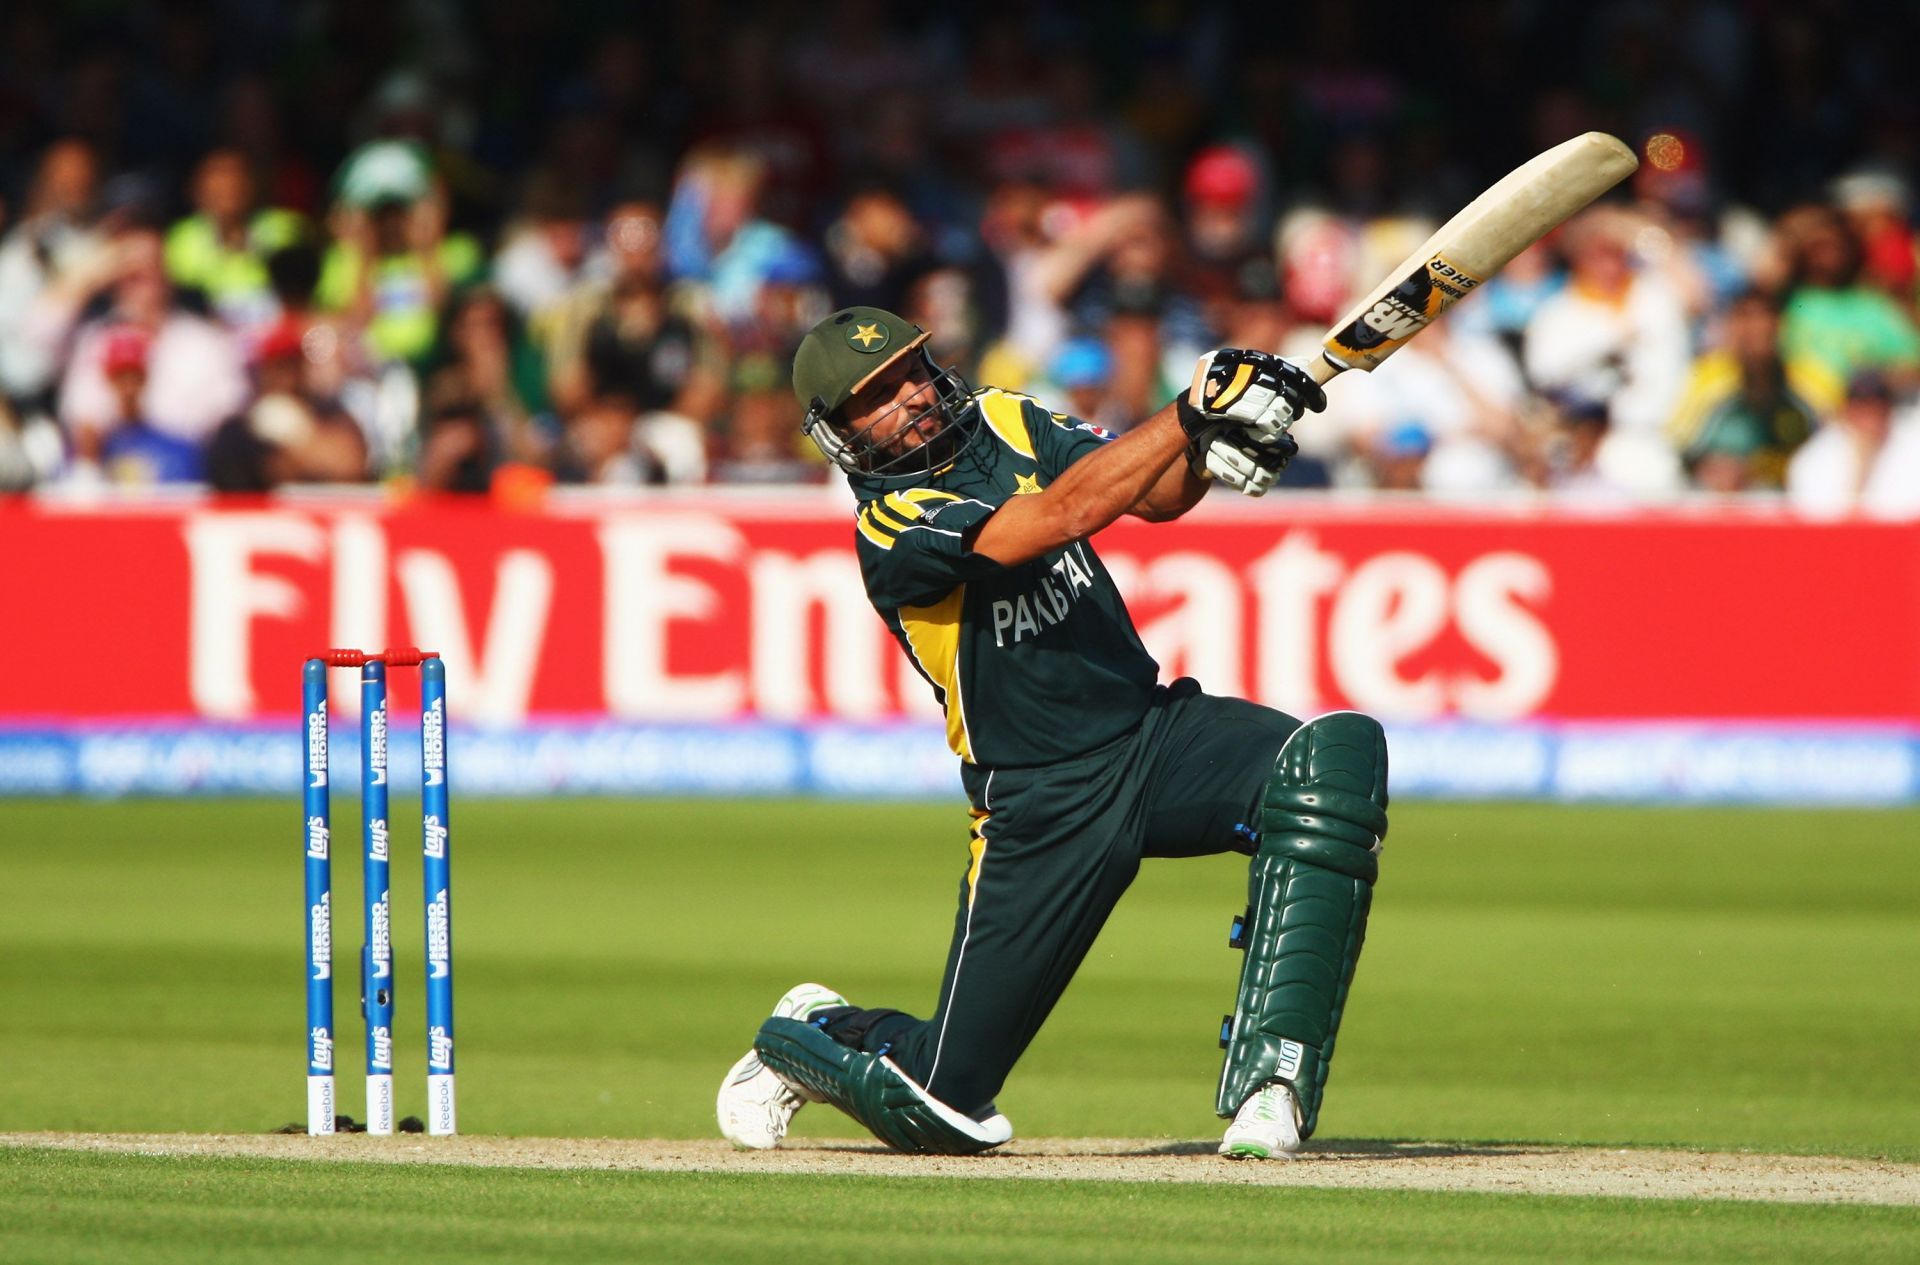 Shahid Afridi smashes a boundary during his match-winning knock in the 2009 finall.